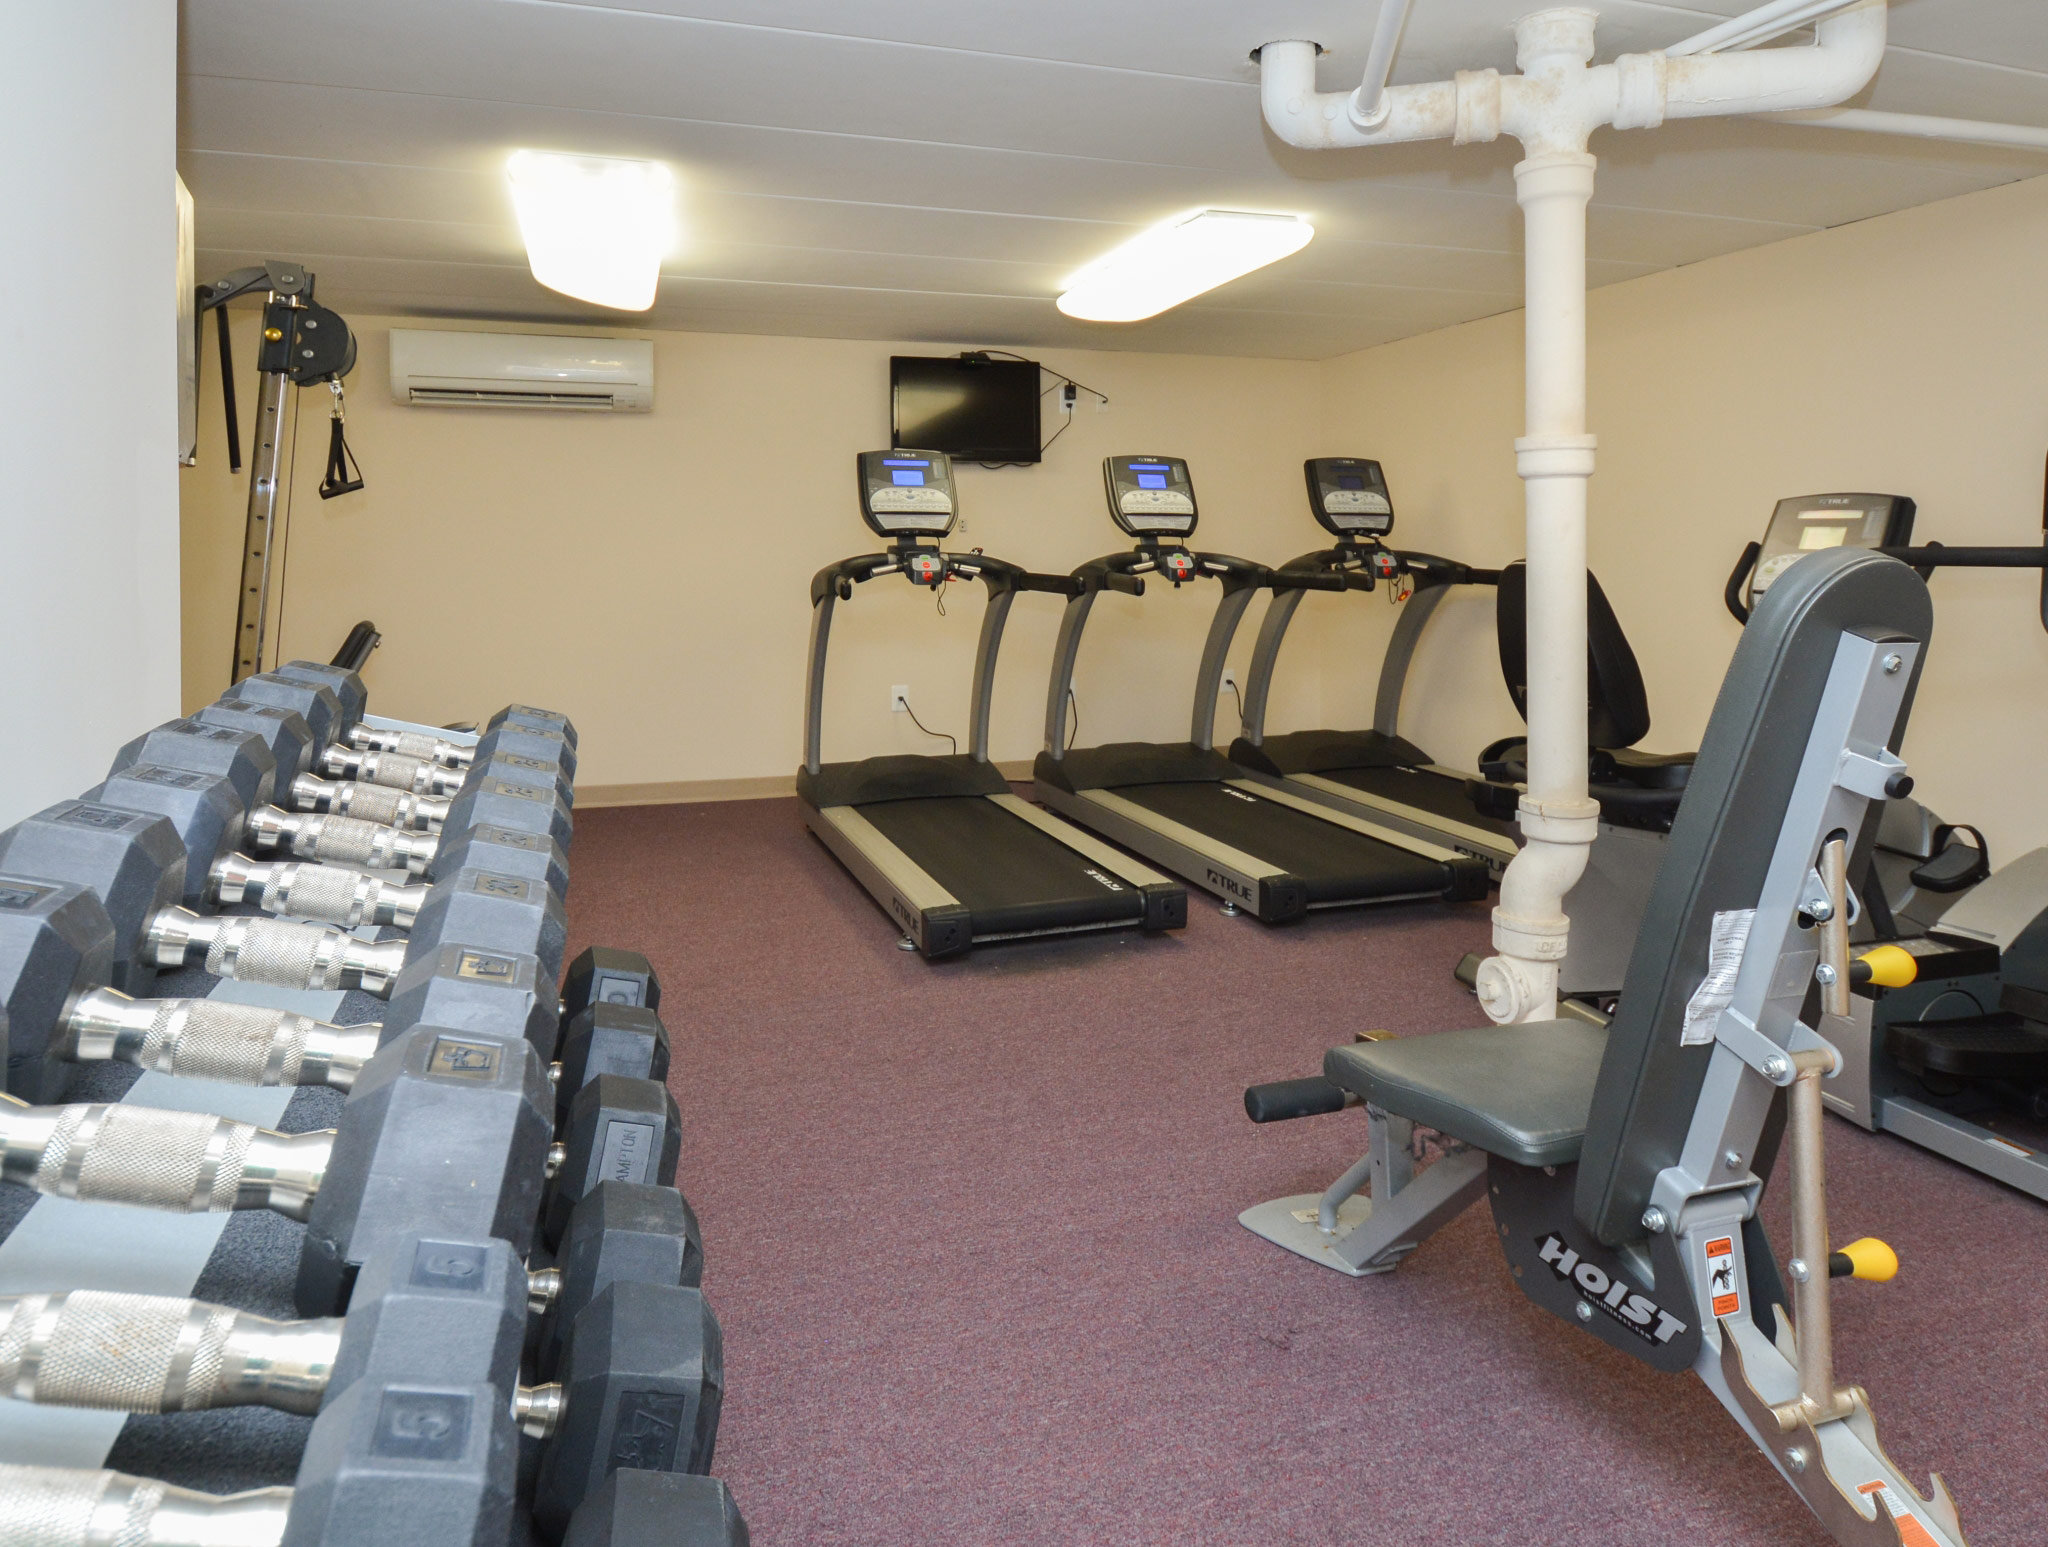 Fitness center area of our community, fitted with fitness equipment, soft flooring, and a high ceiling